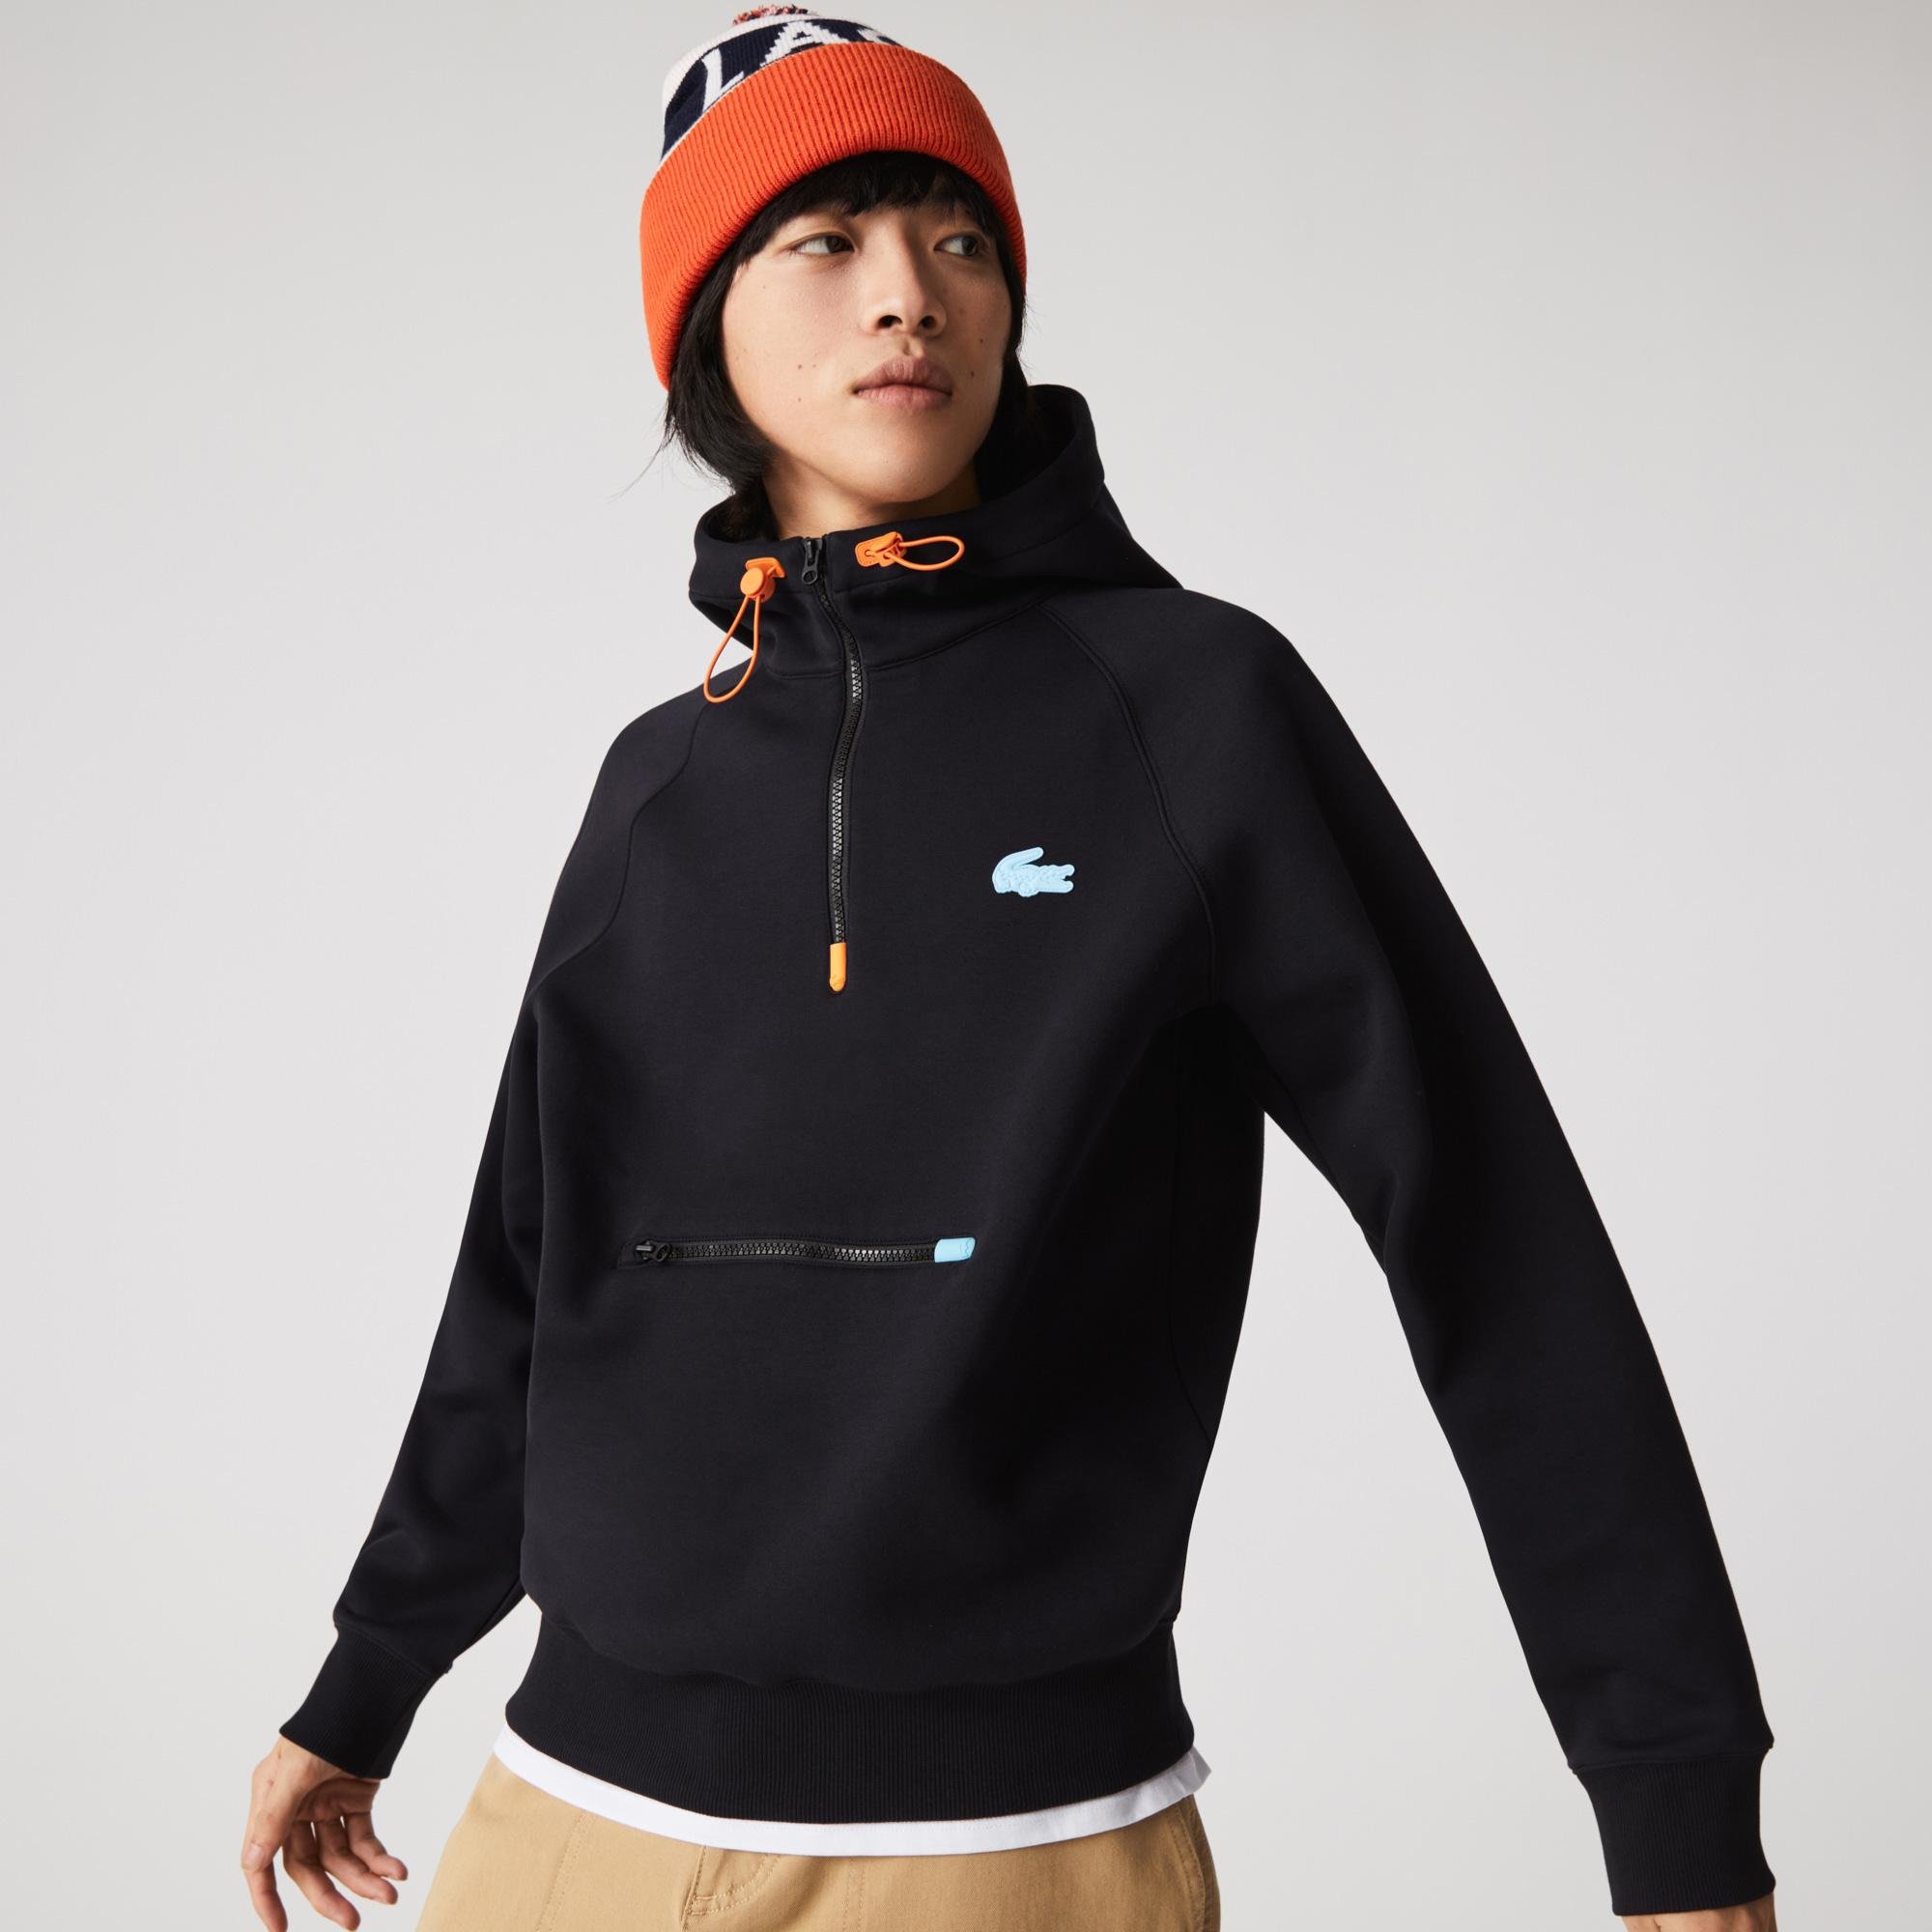 Lacoste Men’s Colored Details Hooded Pullover Sweatshirt